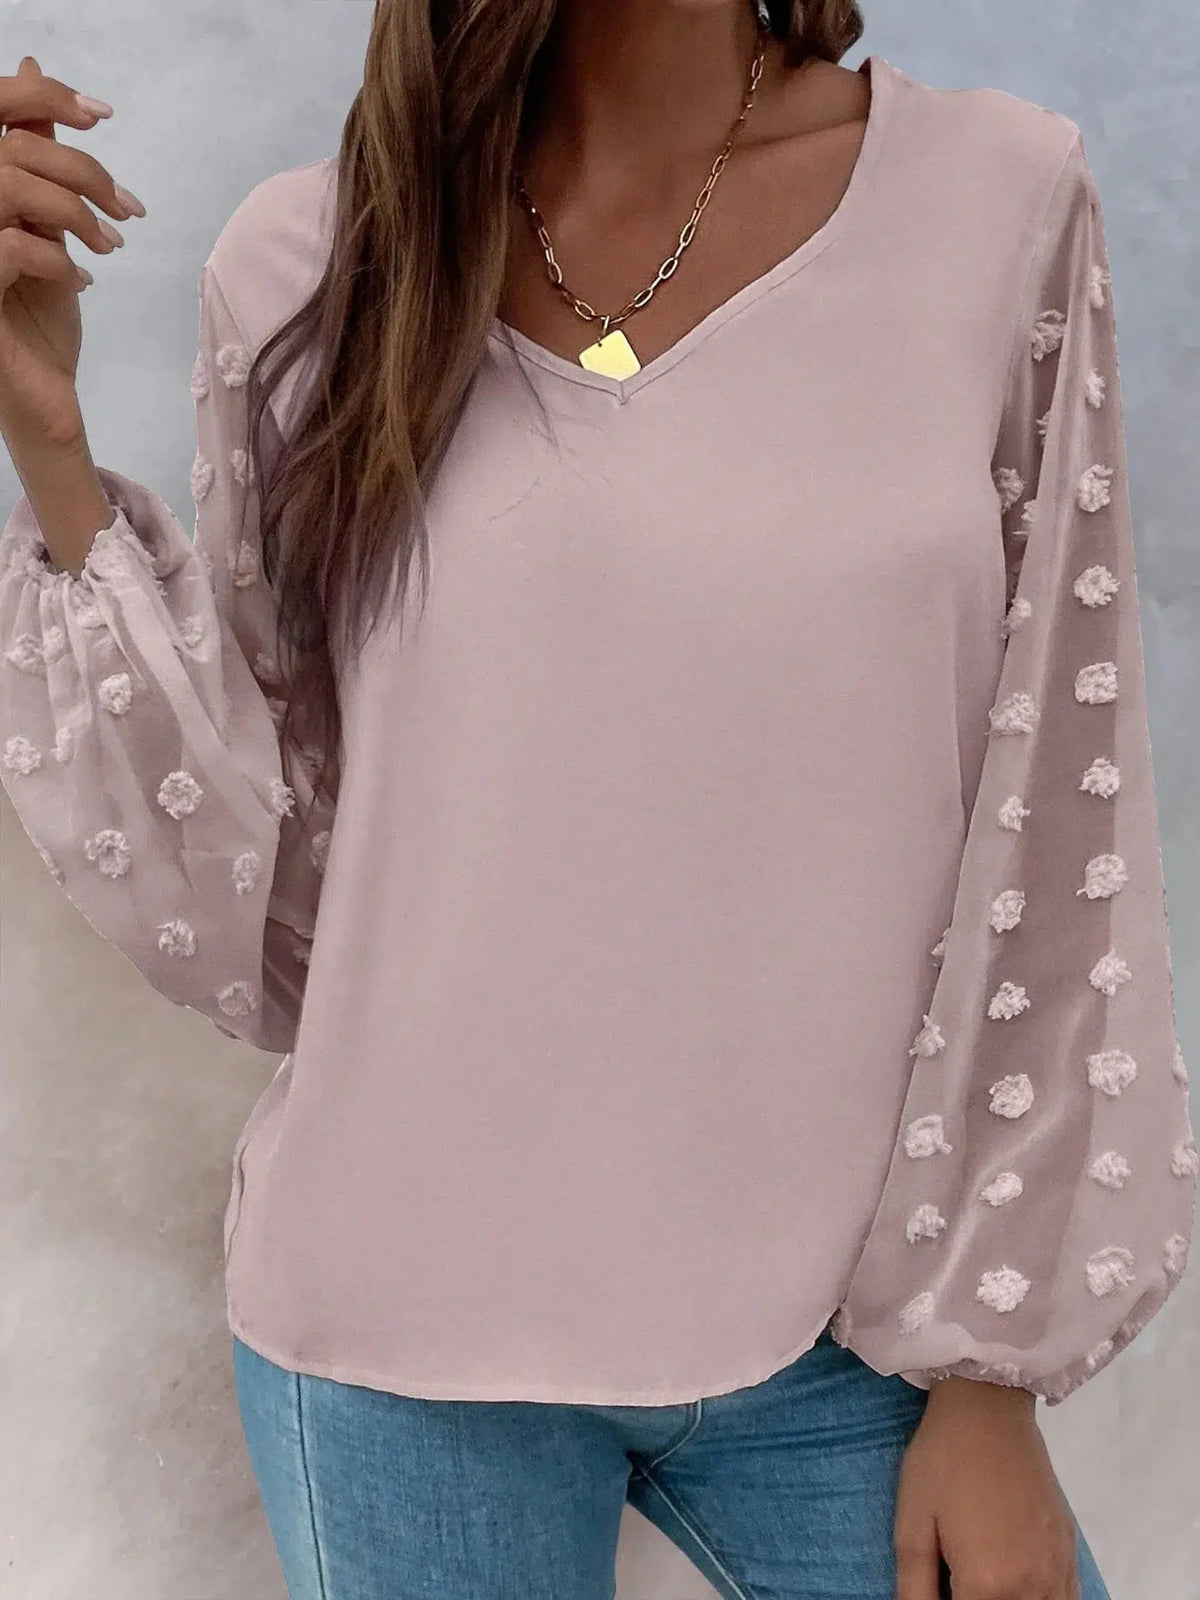 Women Elegant Solid Color Blouses Shirts Casual V Neck Puff Short Sleeve Blouse Tops Ladies Office Wear Shirt-Bennys Beauty World